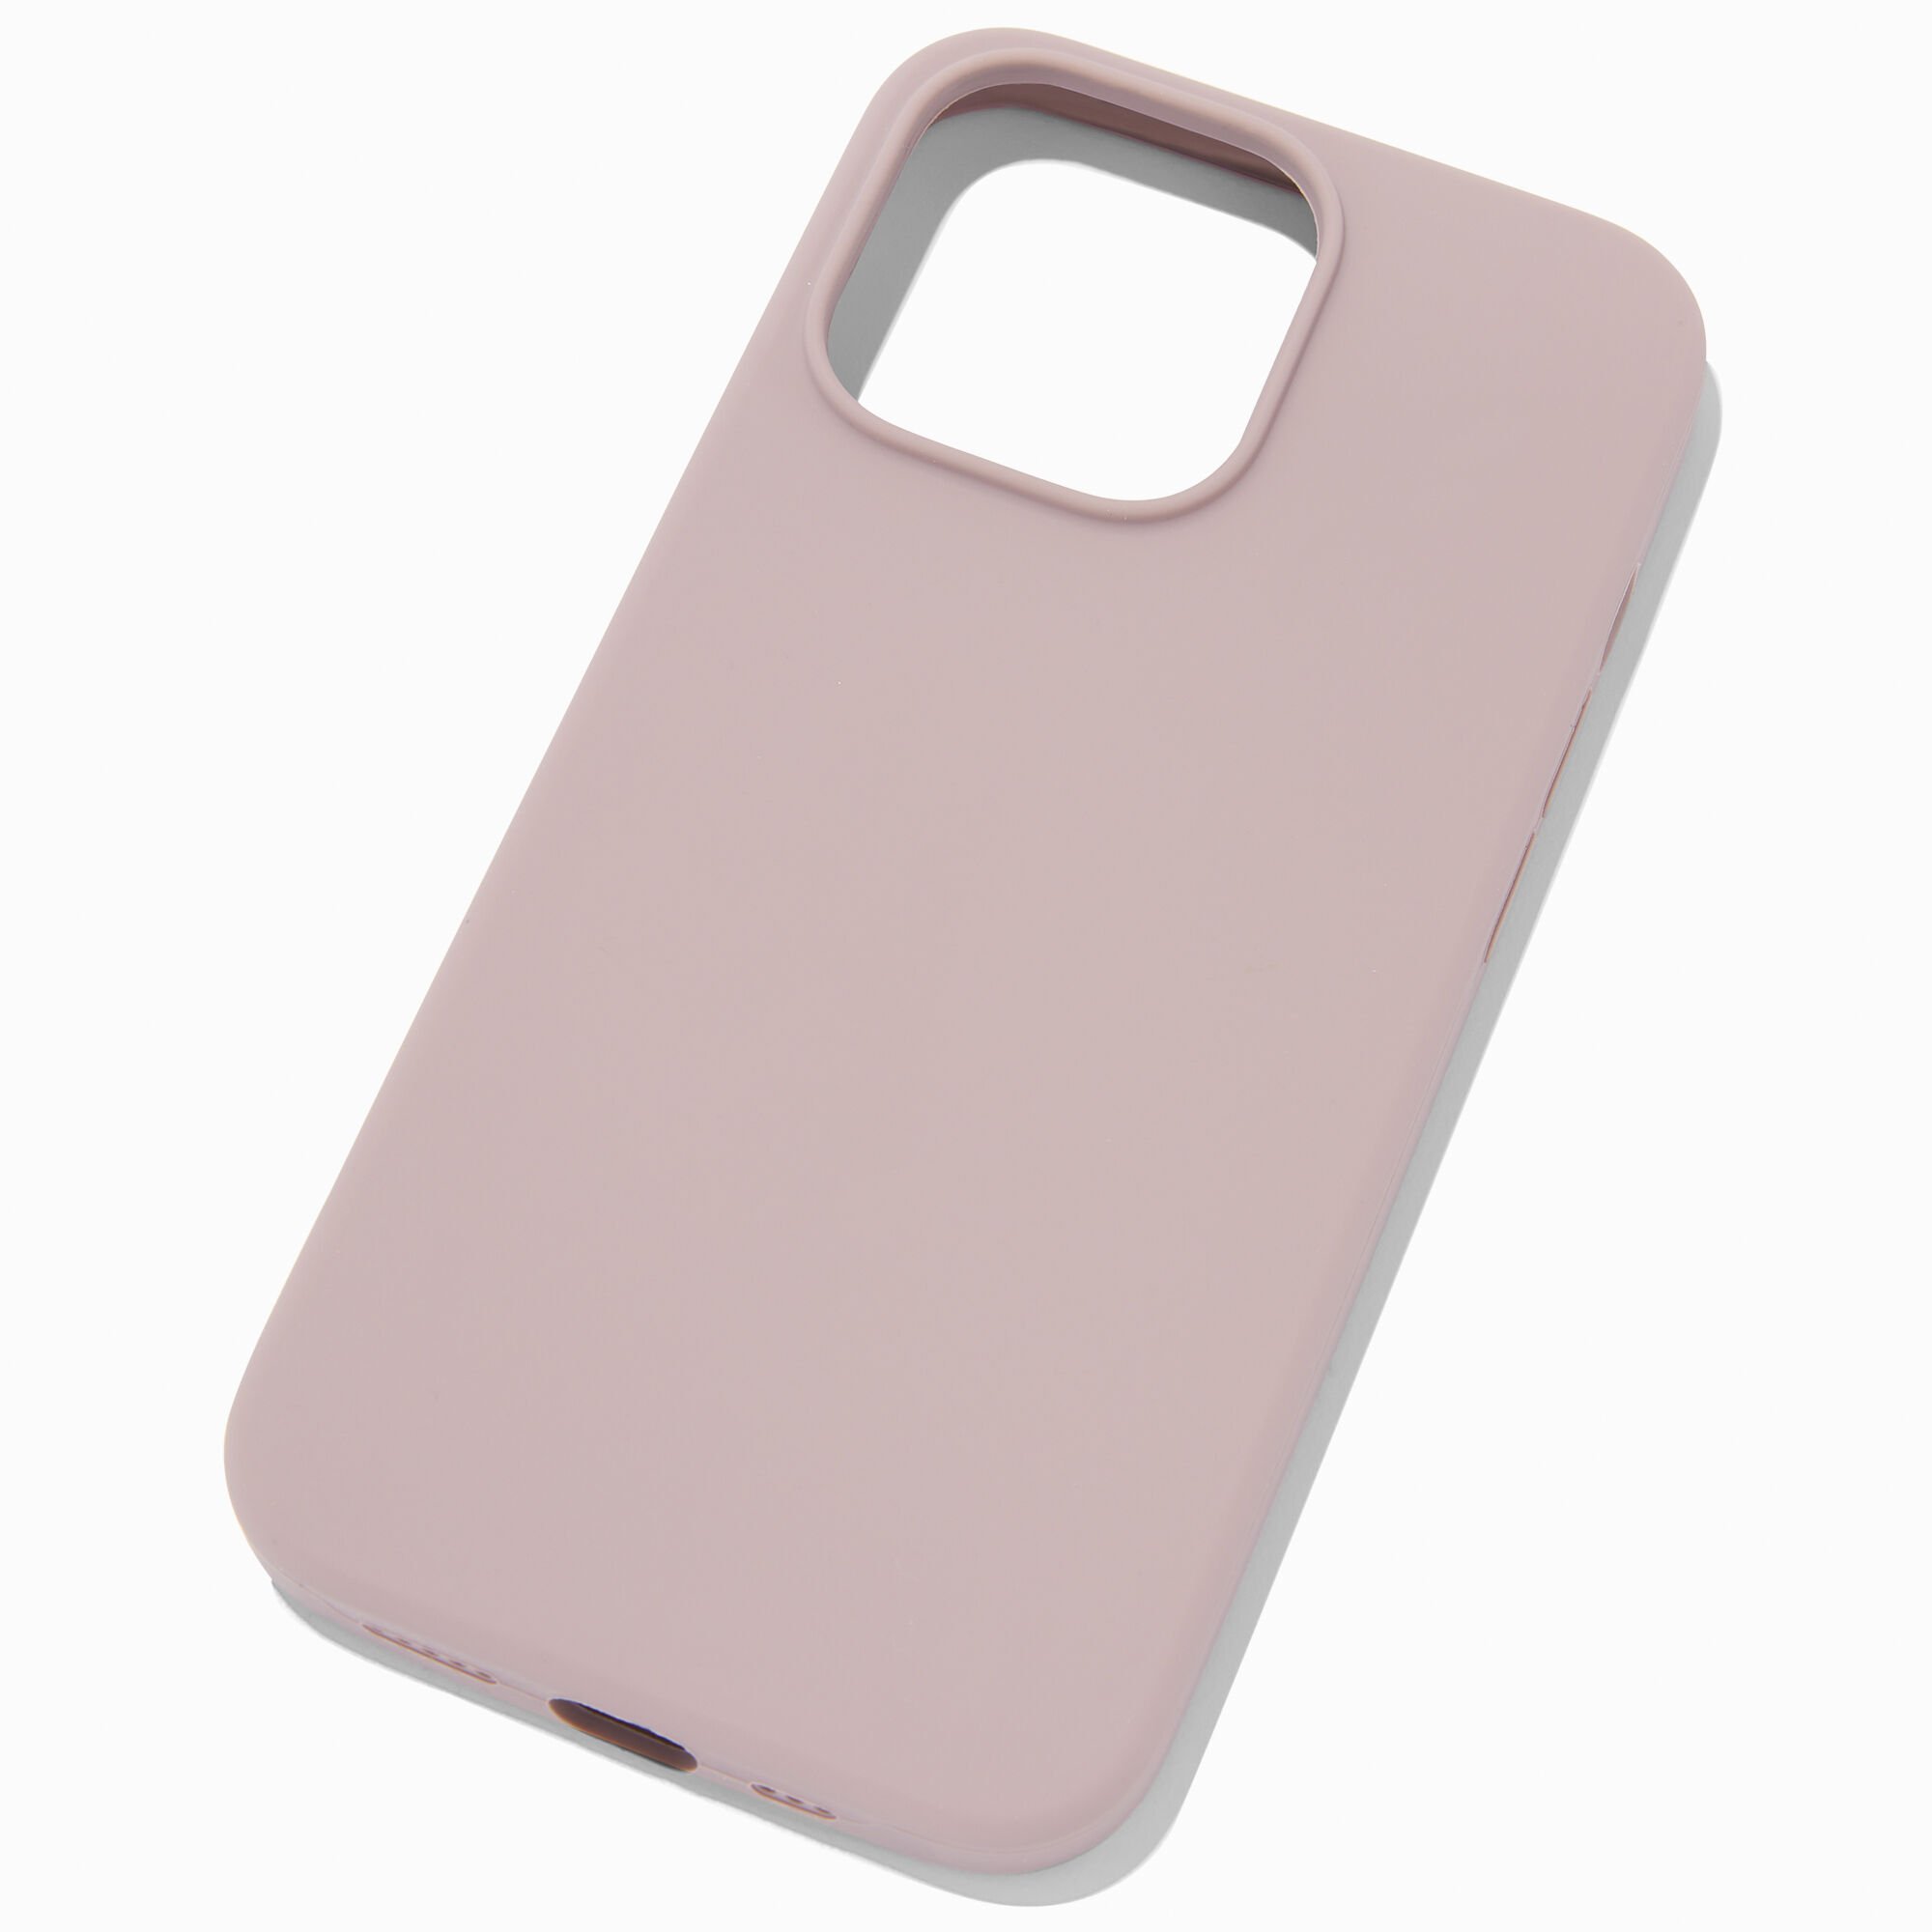 View Claires Solid Silicone Phone Case Fits Iphone 13 Pro Mauve information